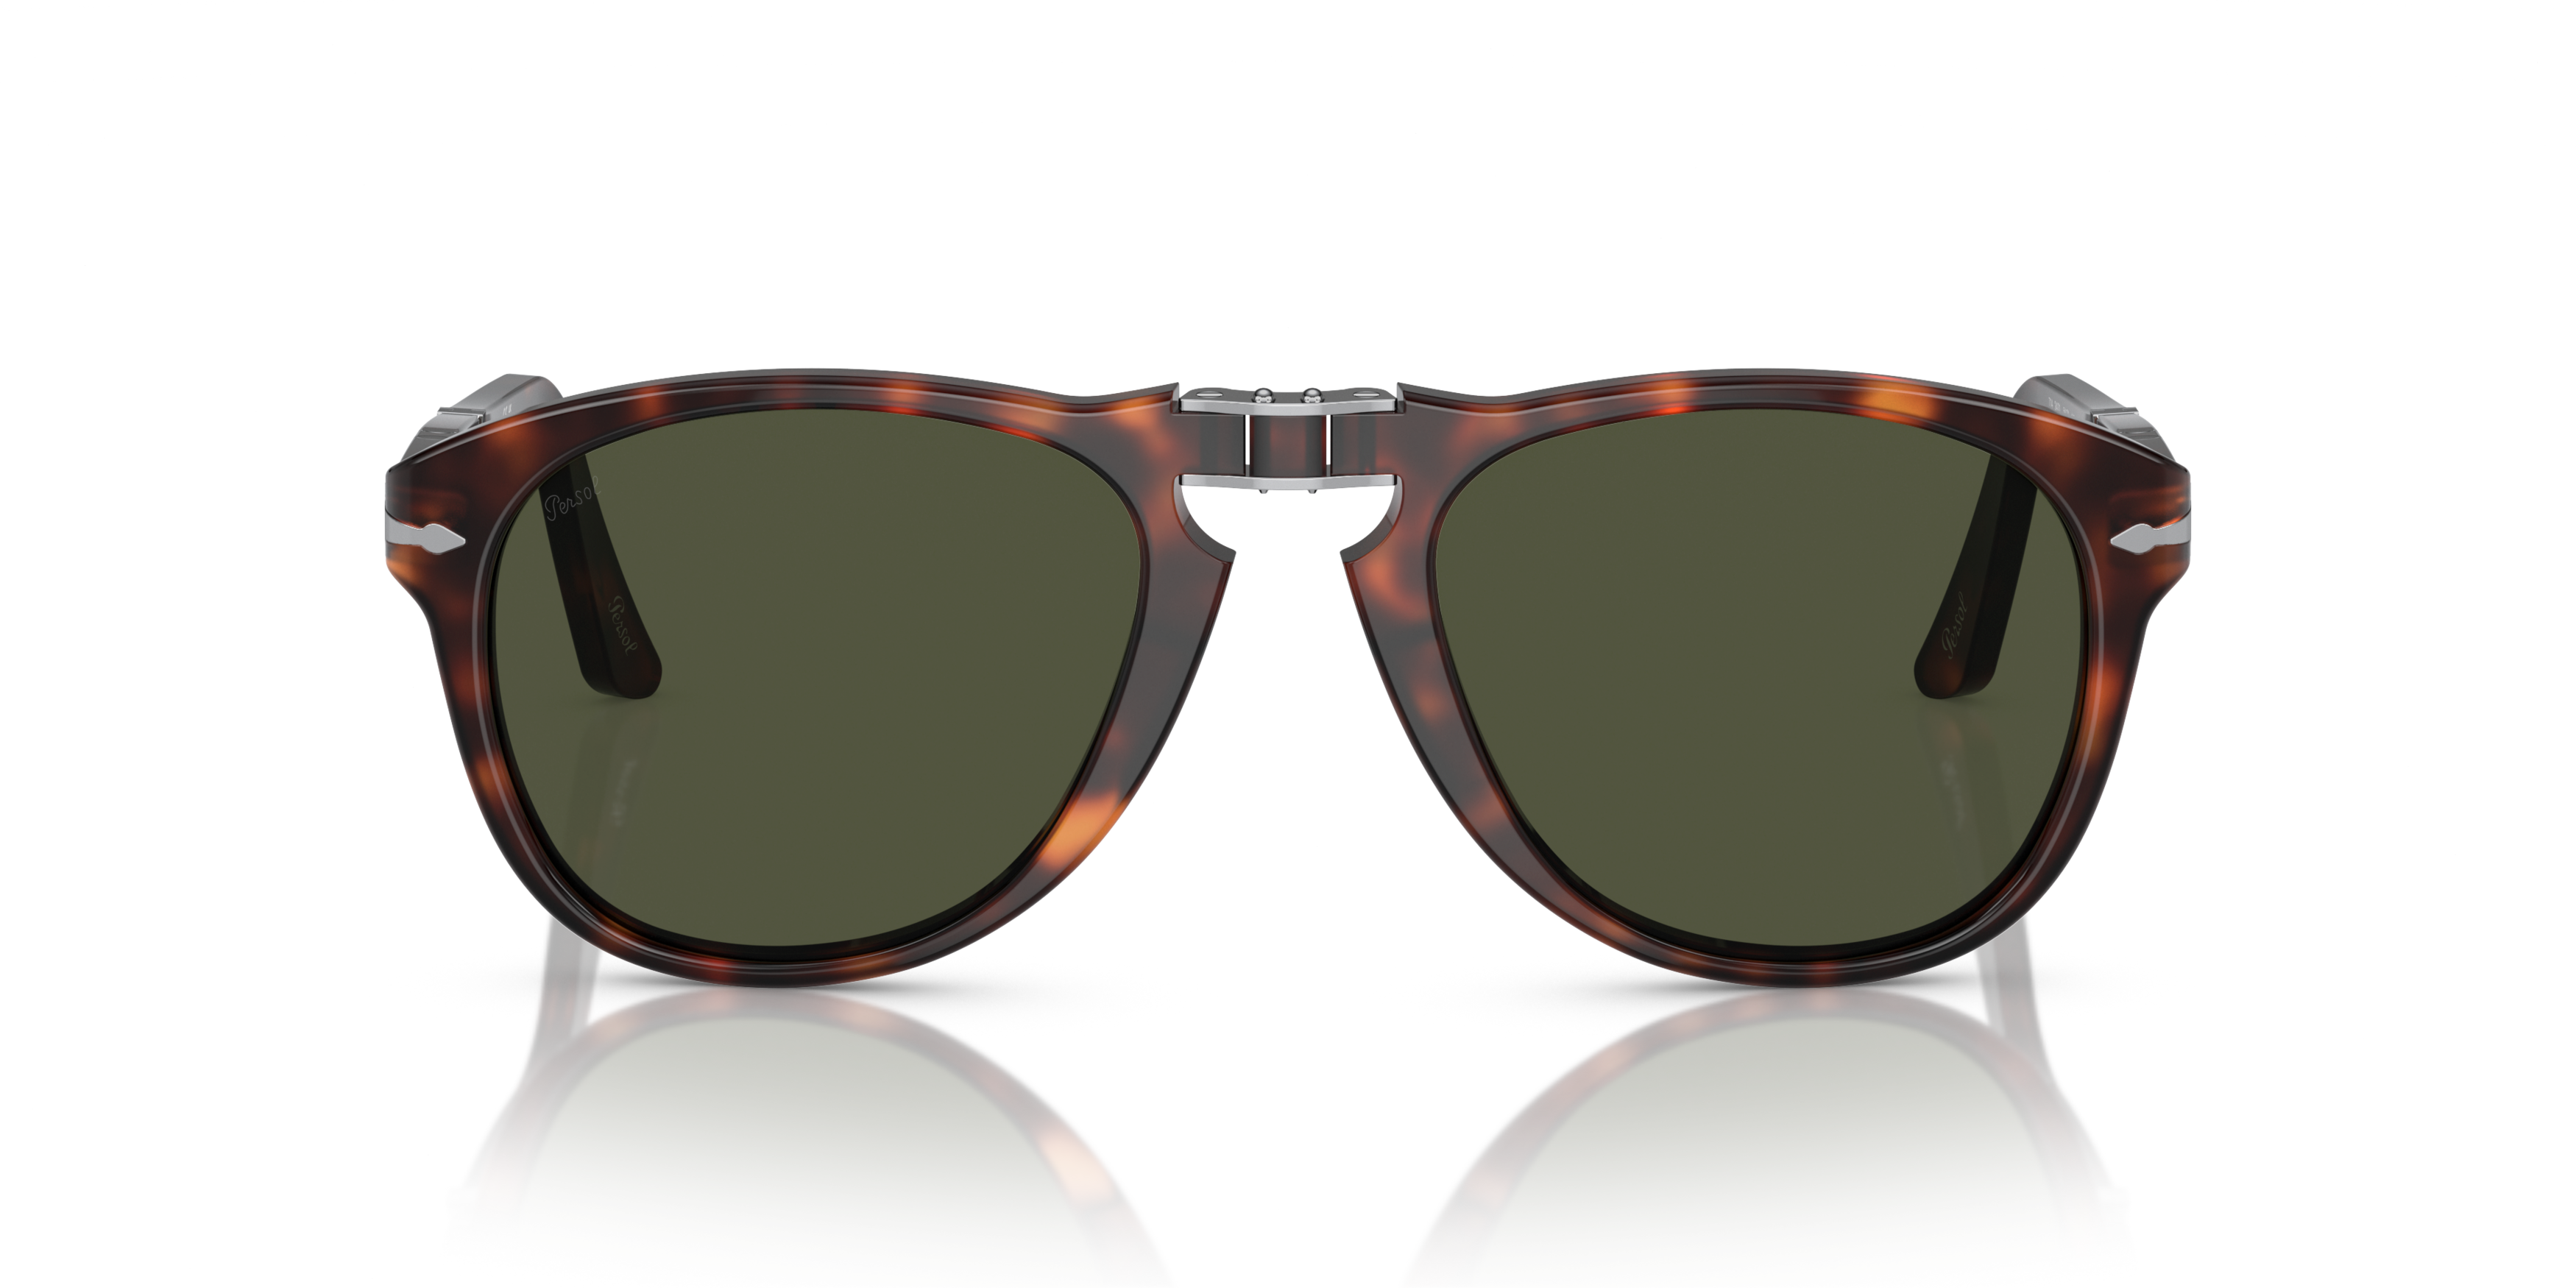 [products.image.front] PERSOL PO0714 24/31